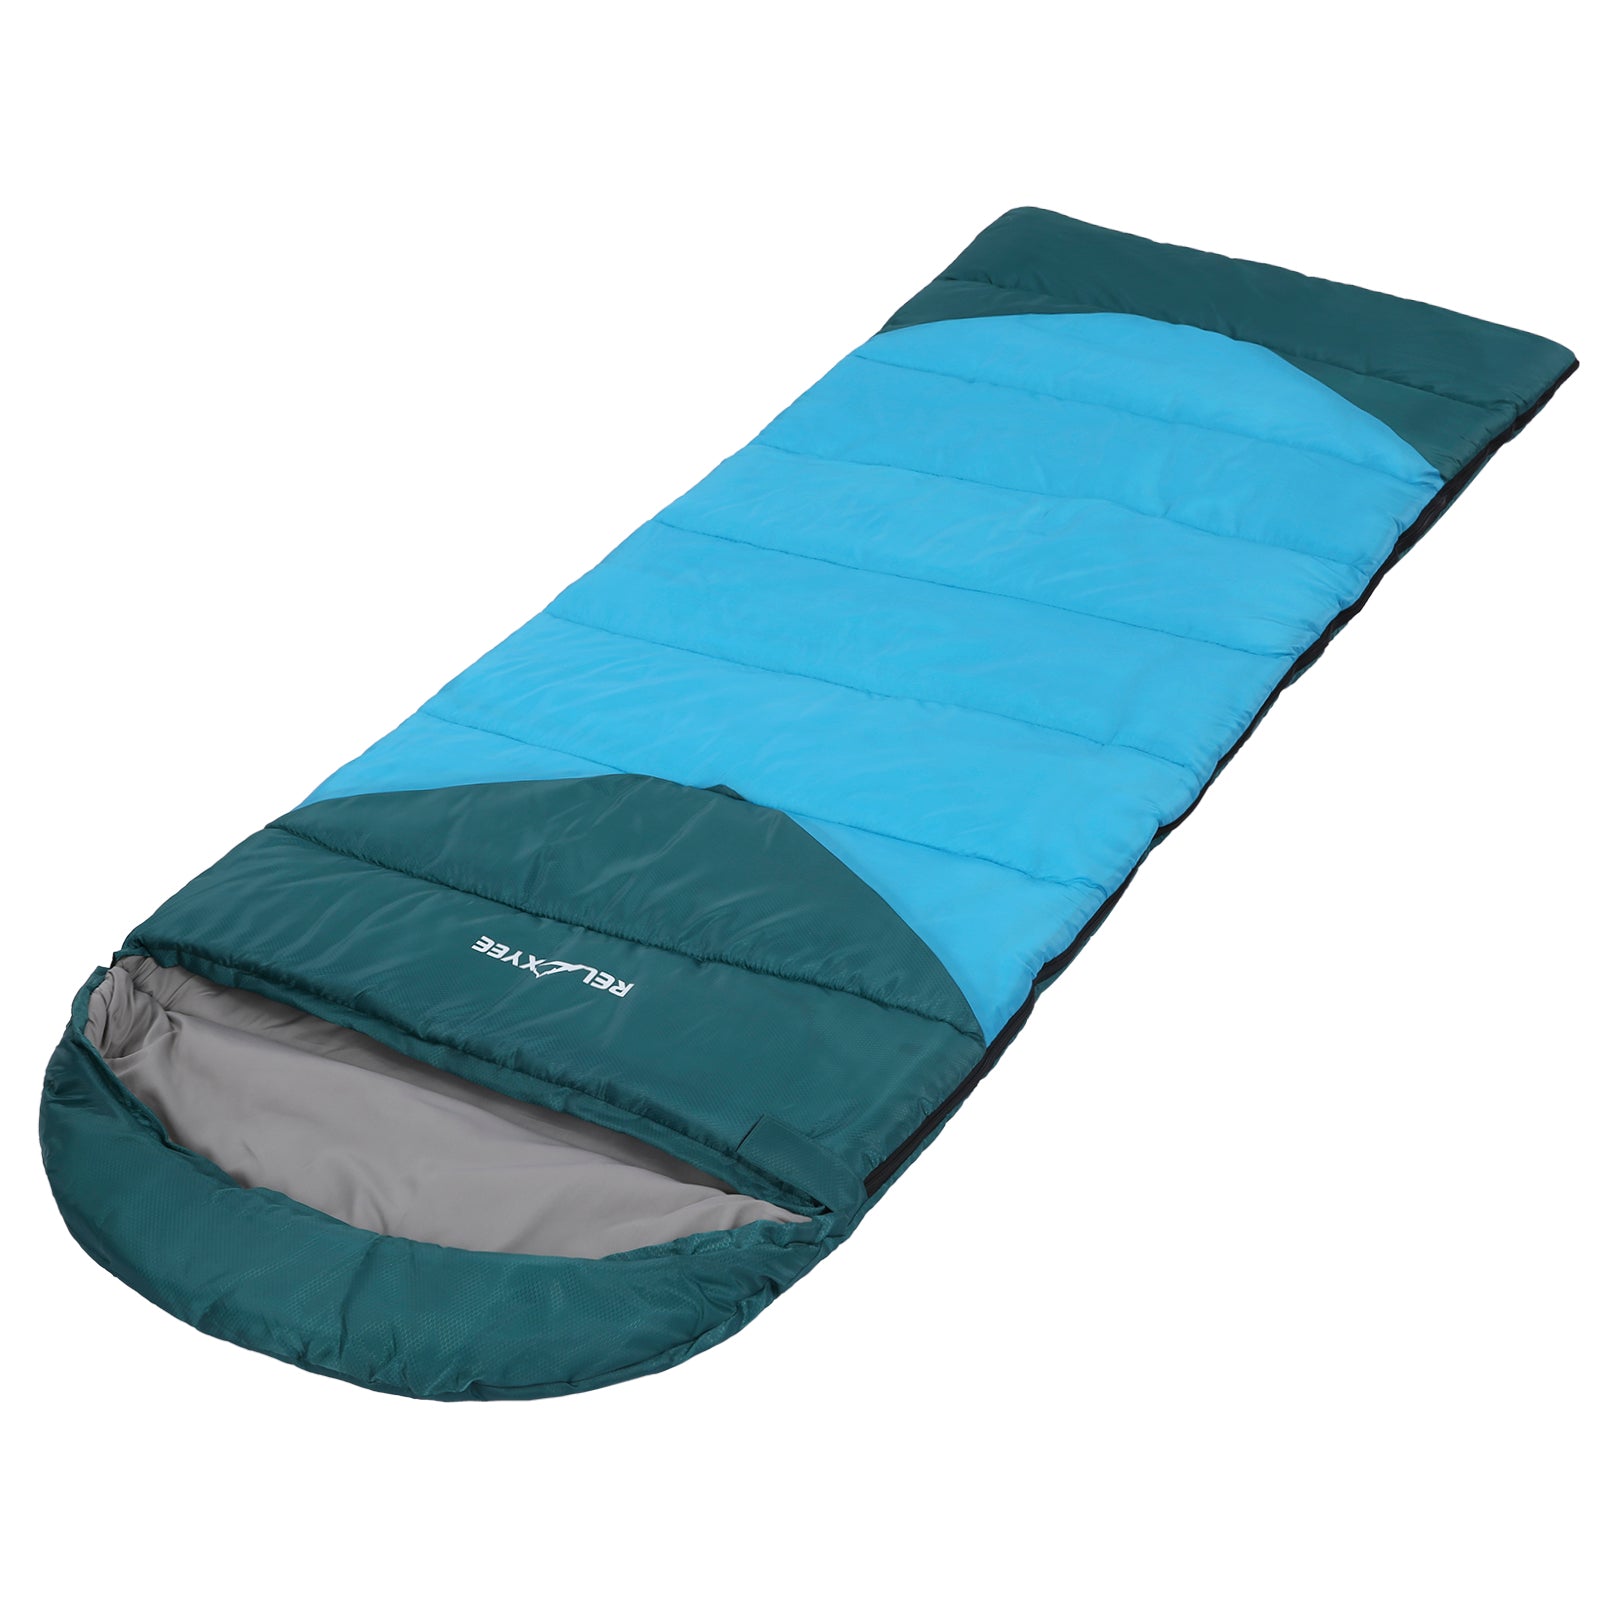 RELAXYEE Camping Sleeping Bag for Adults Outdoor Water-resistant Cold Weather Sleeping Bag Compact Camping Gear for 3 Seasons Hiking Backpacking Traveling